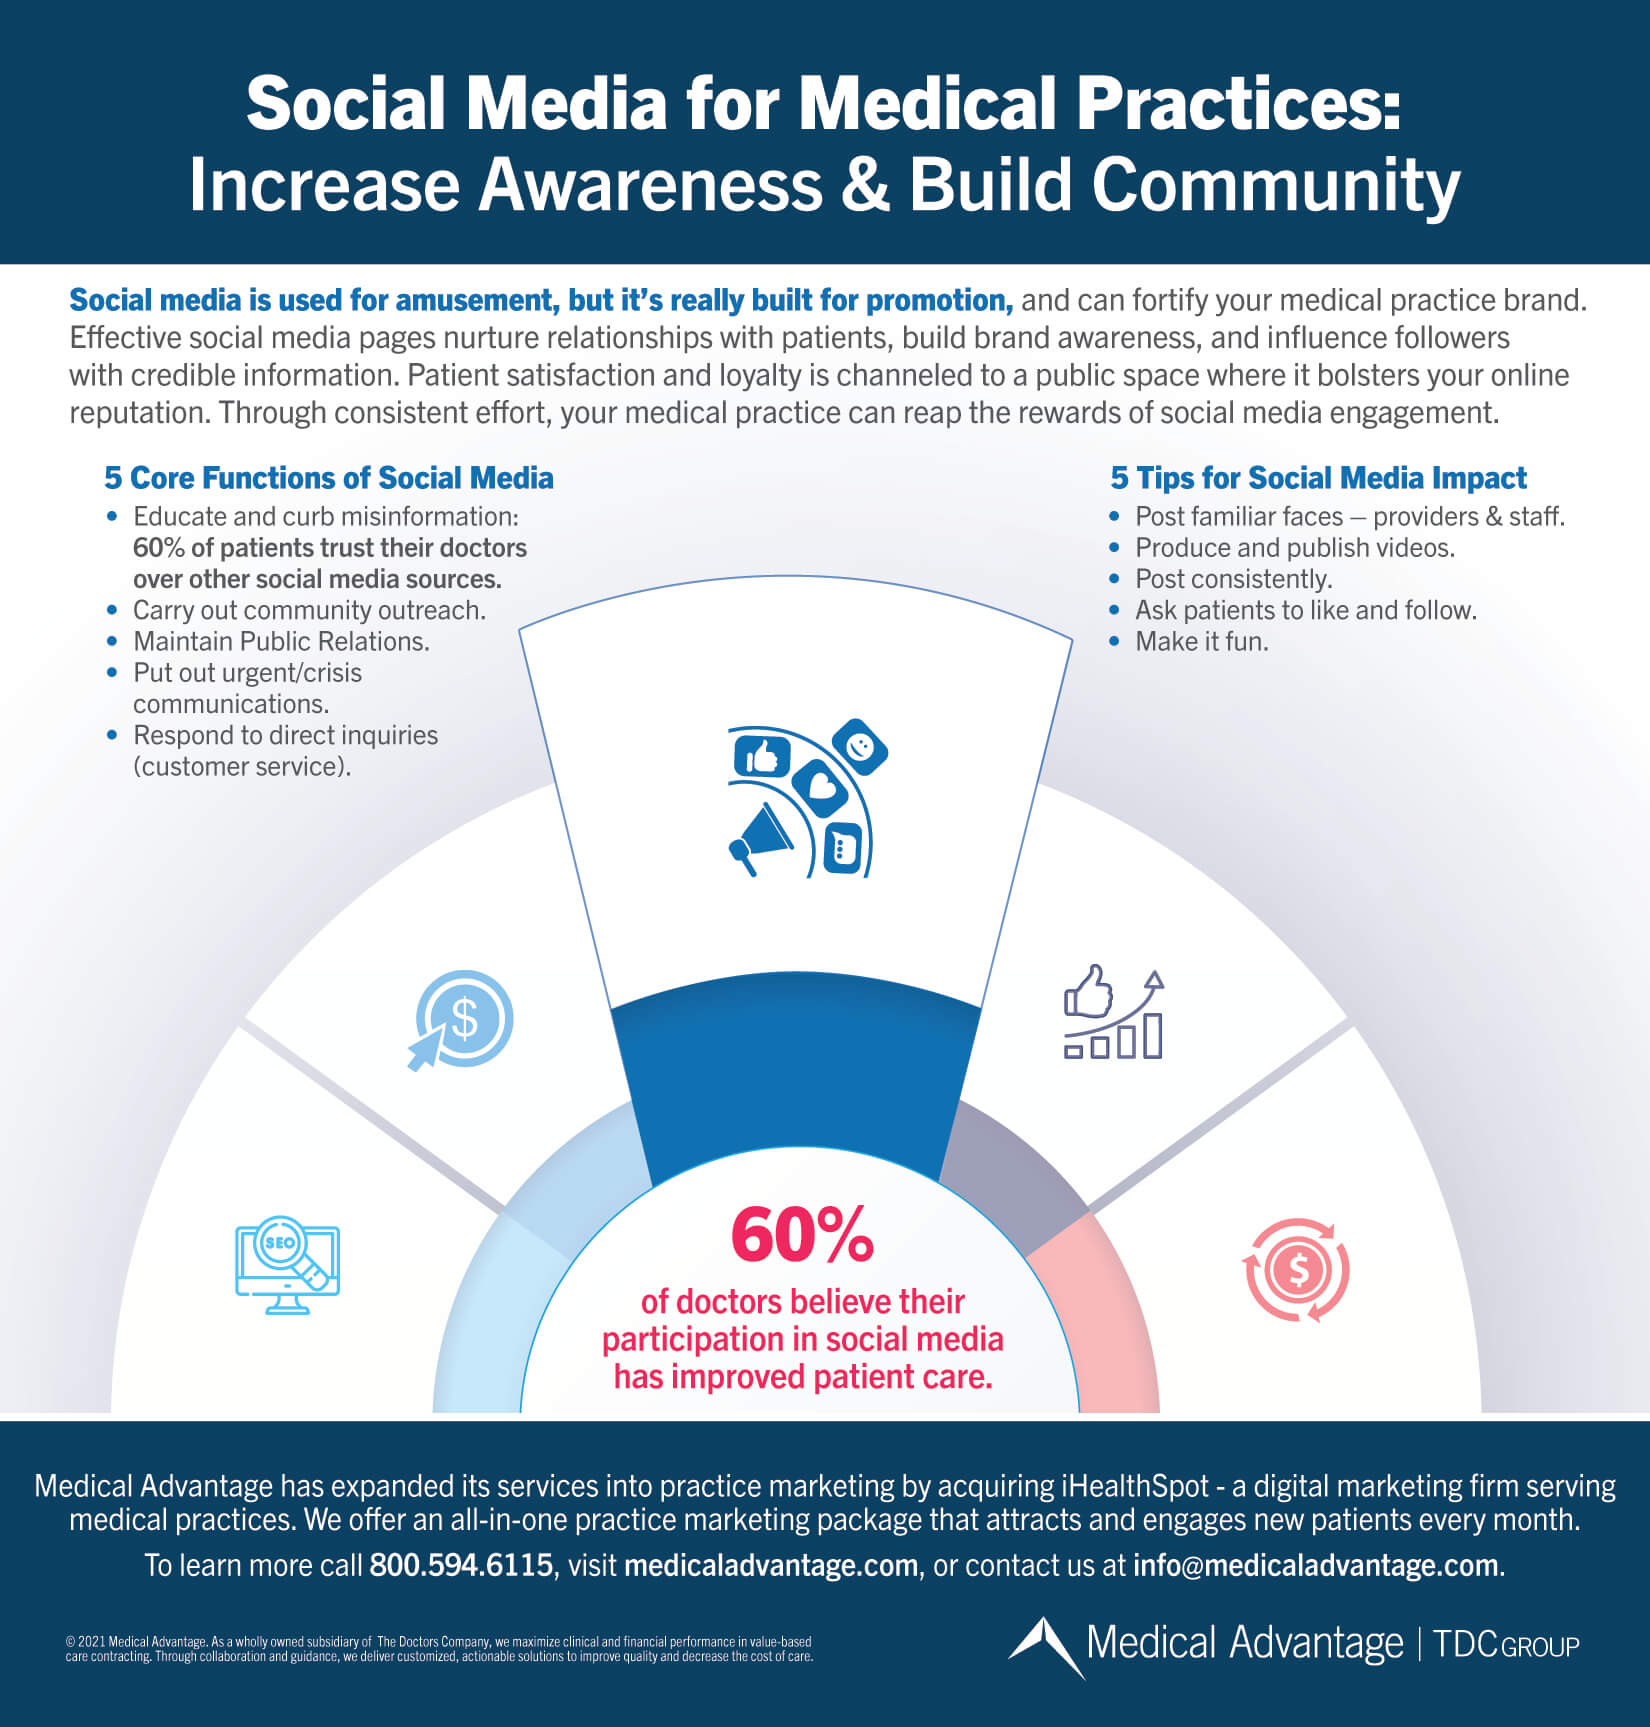 Social Media for Medical Practices: Increase Awareness & Build Community